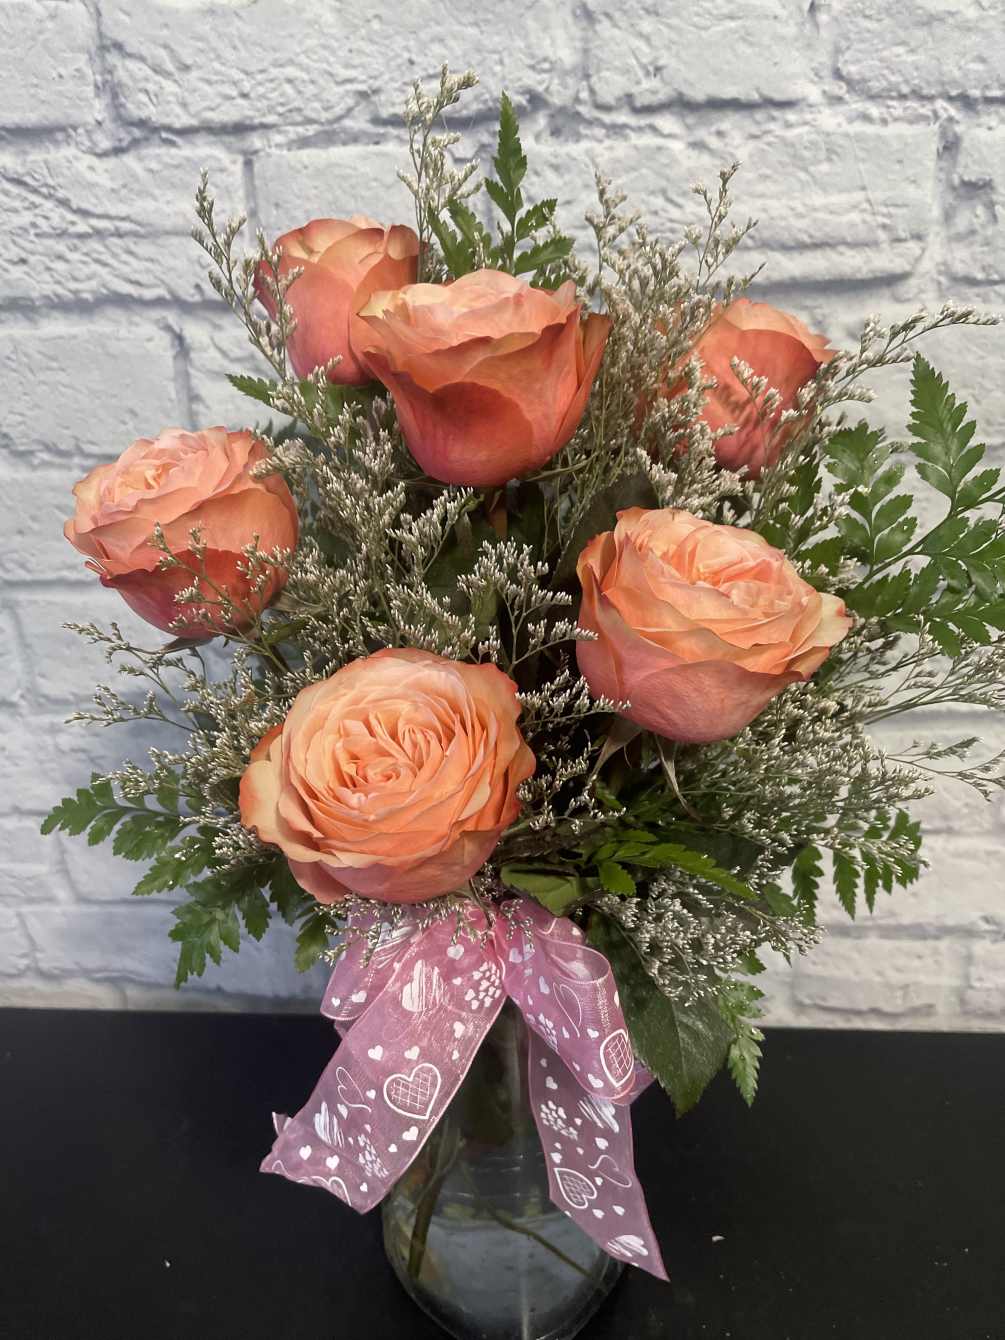 We&#039;ll put 6 roses in a vase with assorted fillers and greenery.
Specify